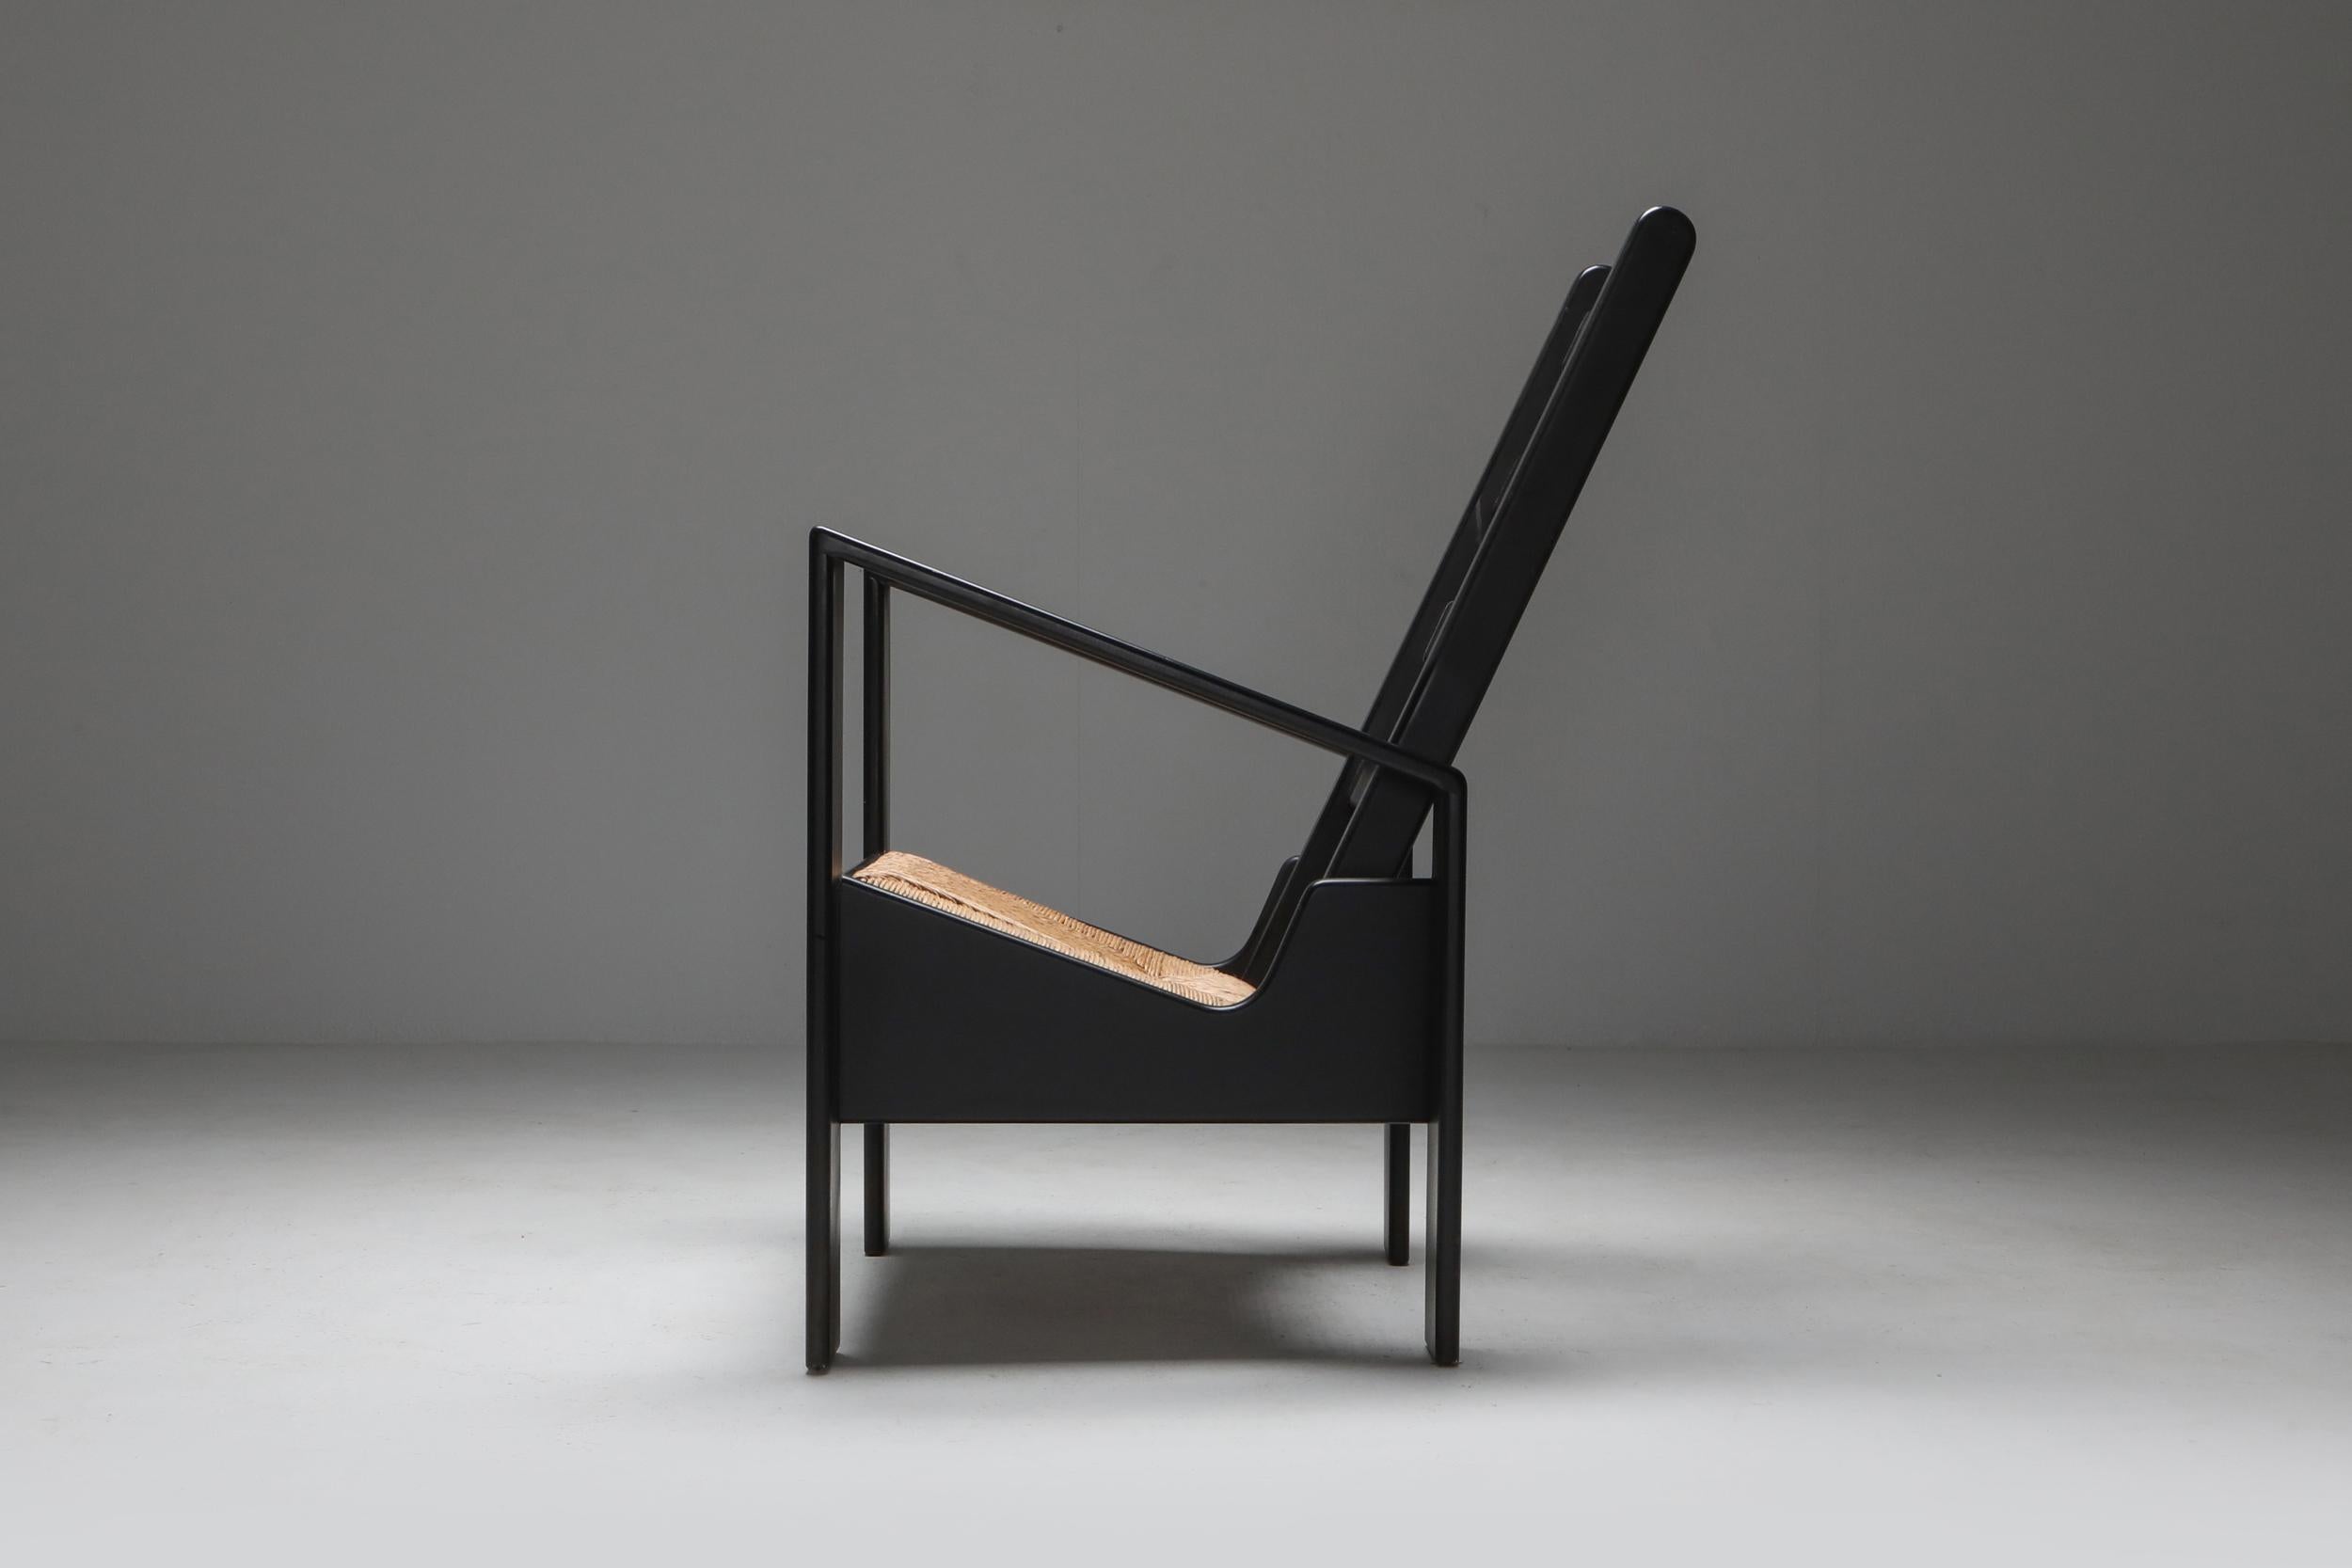 Black lacquer lounge chair with cord seating
unusual piece
sourced in the Netherlands,
but has a French chique to it
A Postmodern piece referencing to the Art Deco greats.
 